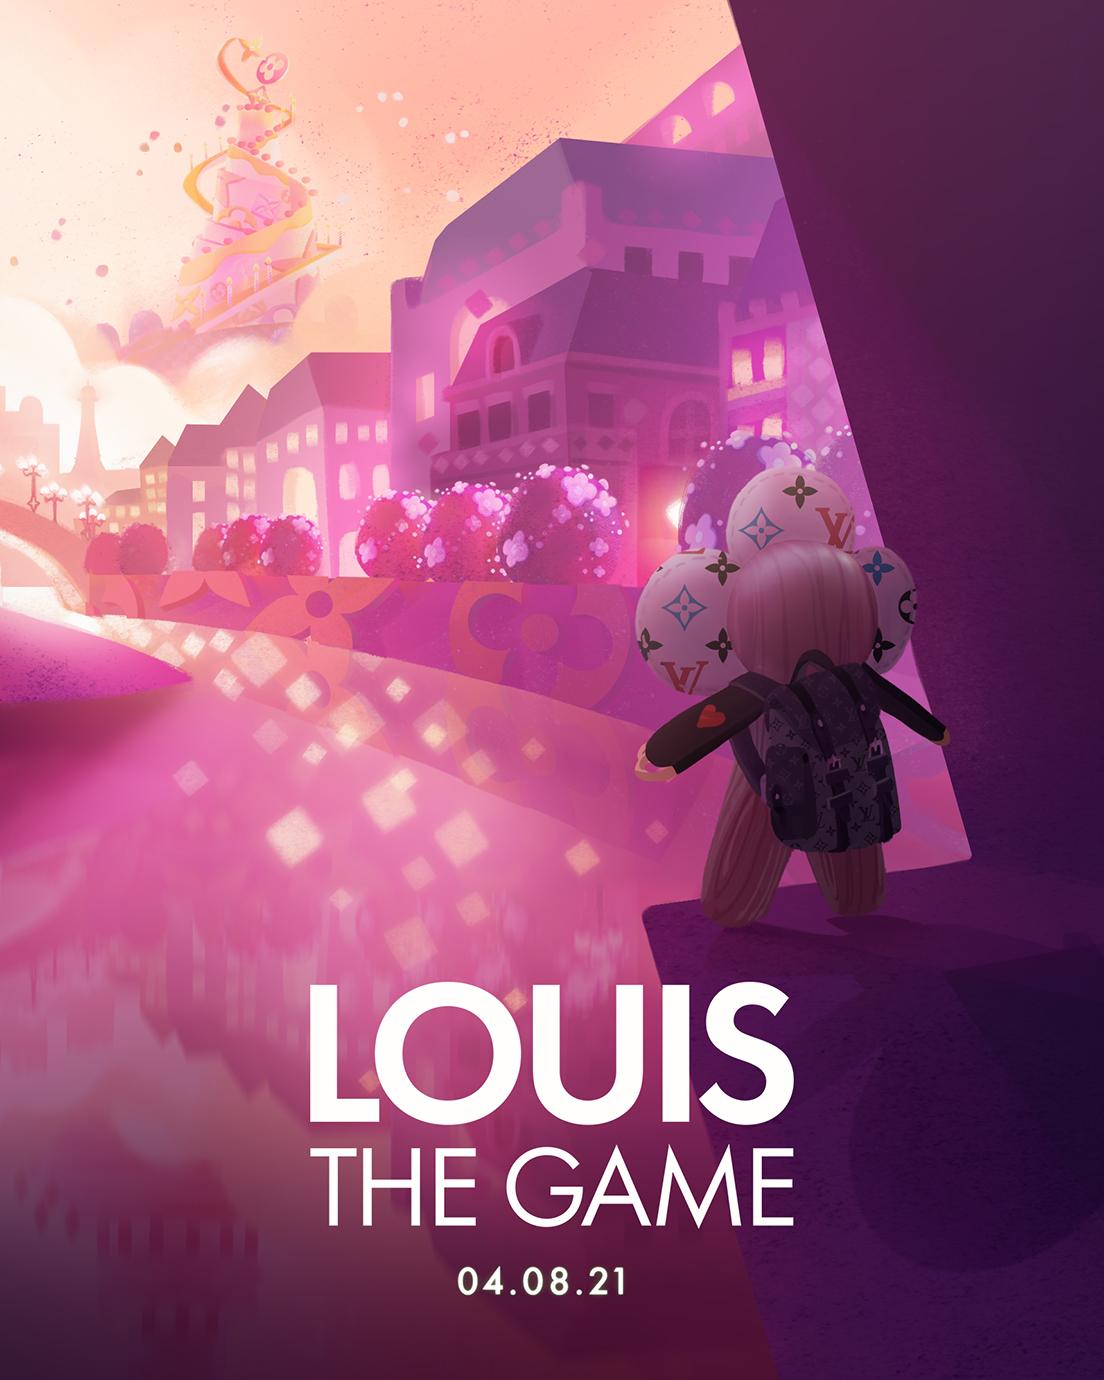 「LOUIS THE GAME」。